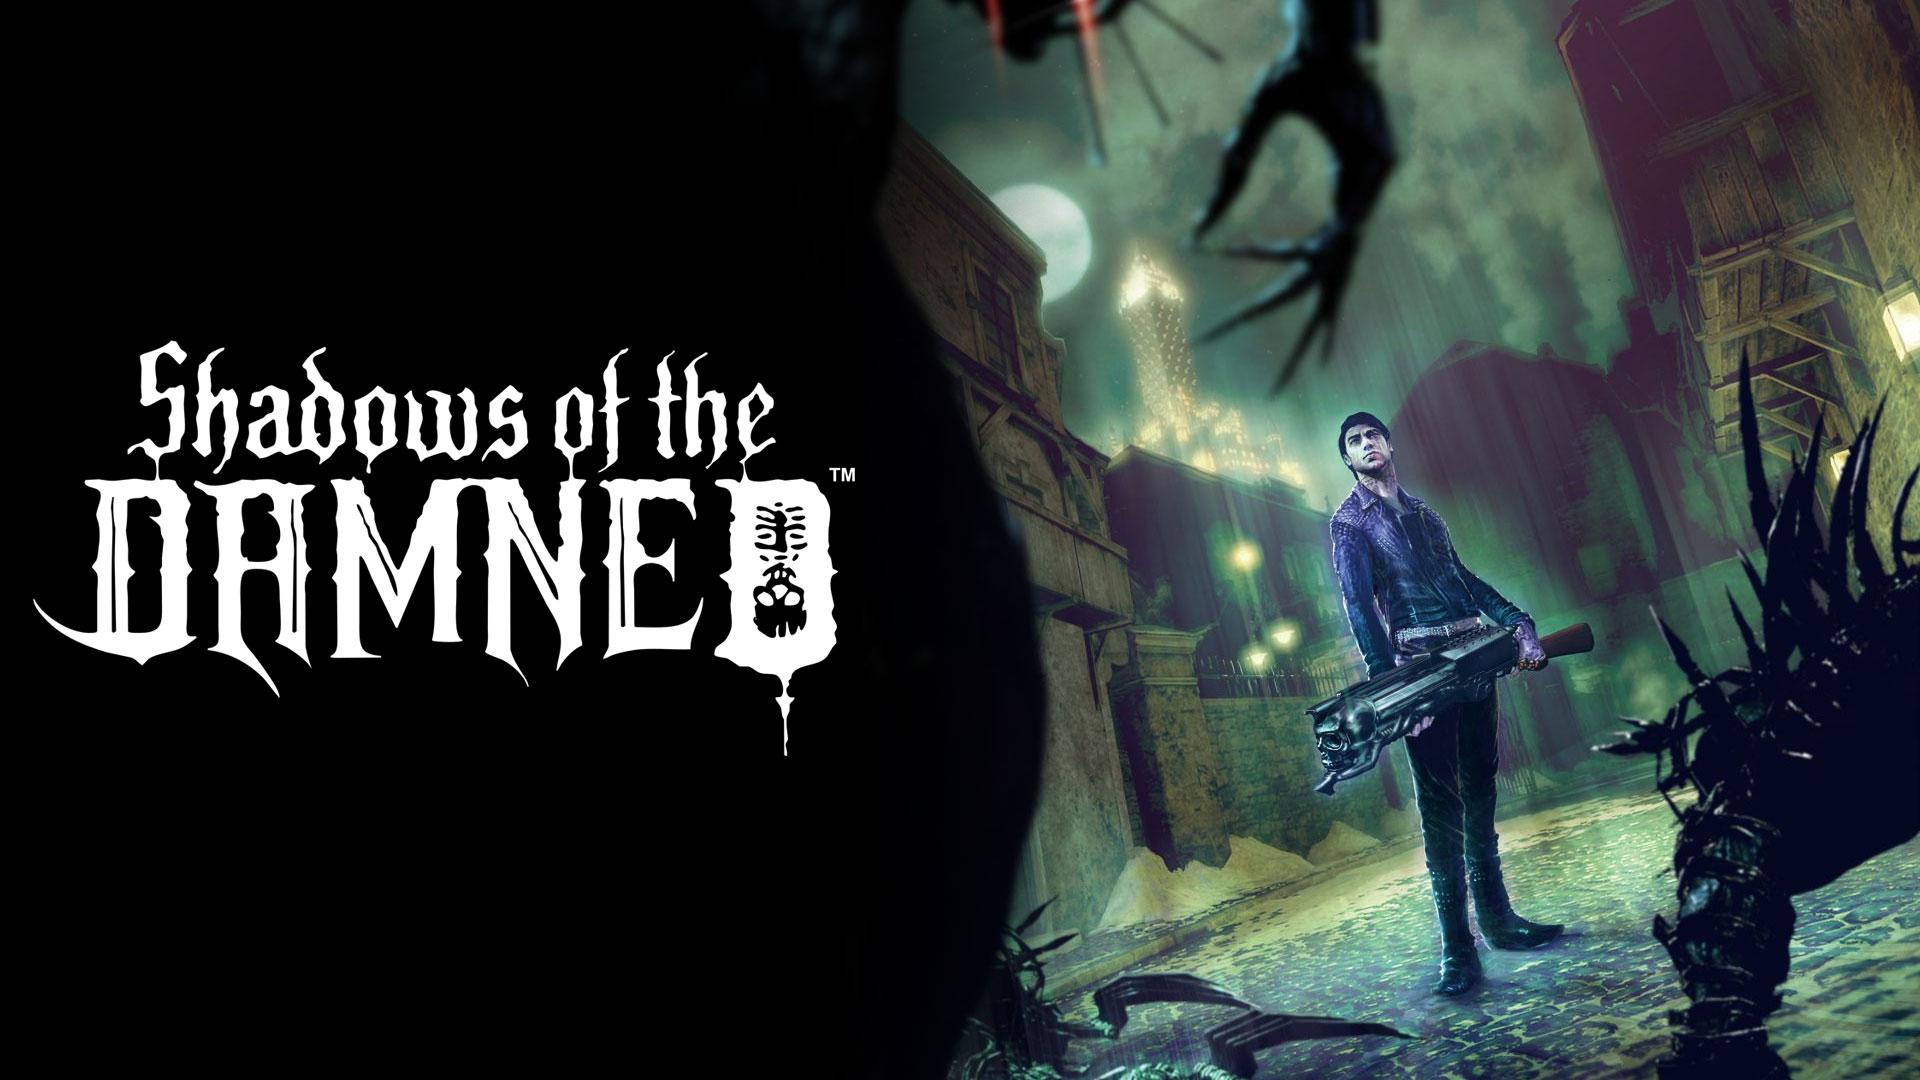 Video Game Shadows of the Damned HD Wallpaper | Background Image